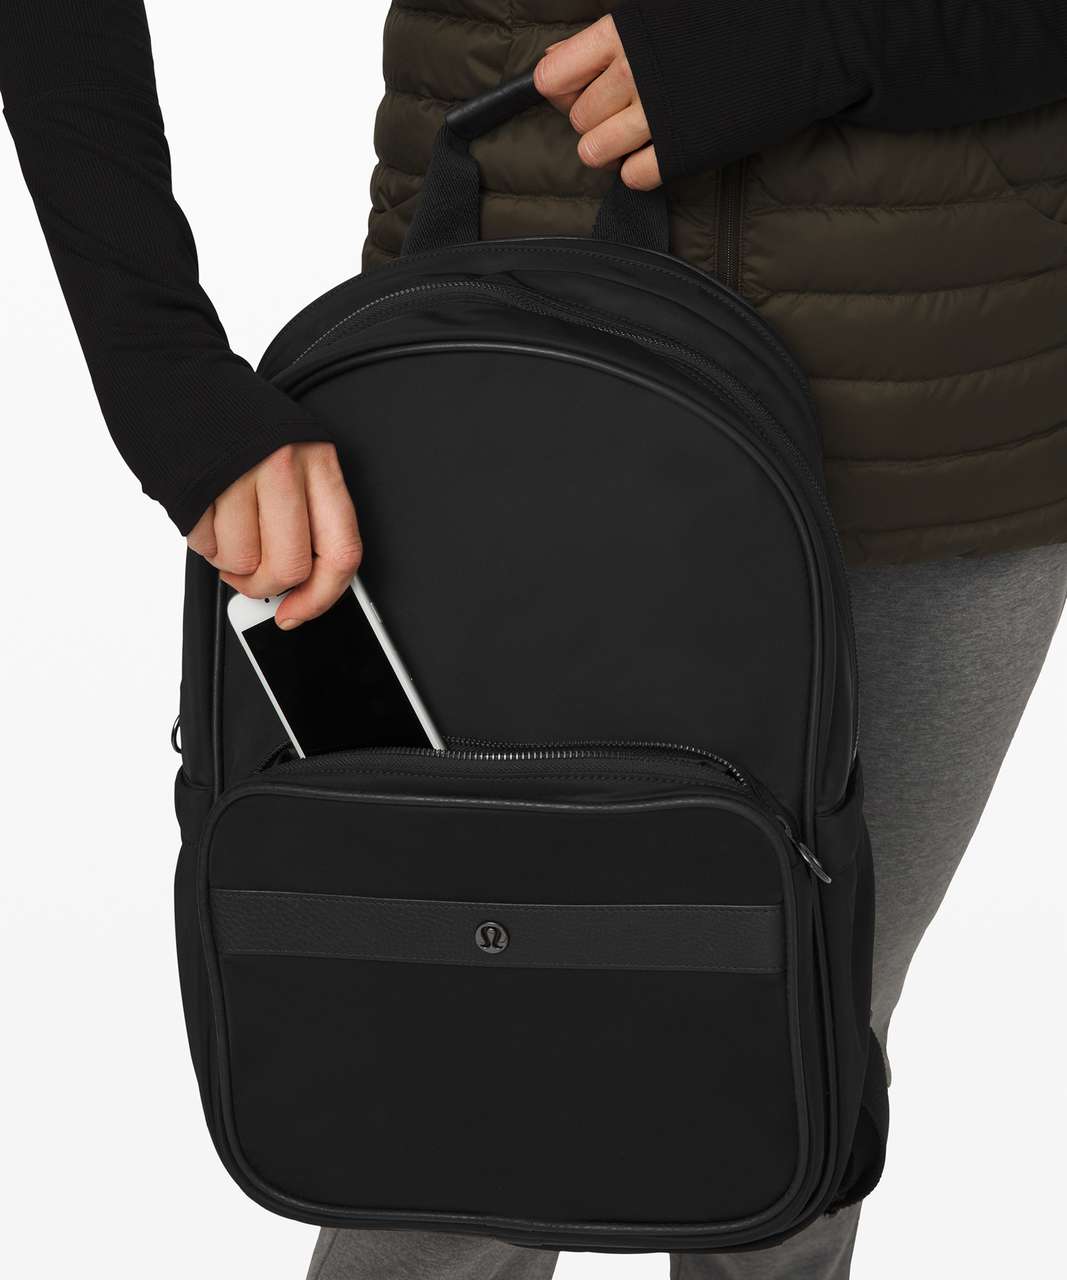 Lululemon Now and Always Backpack *18L - Black (First Release)